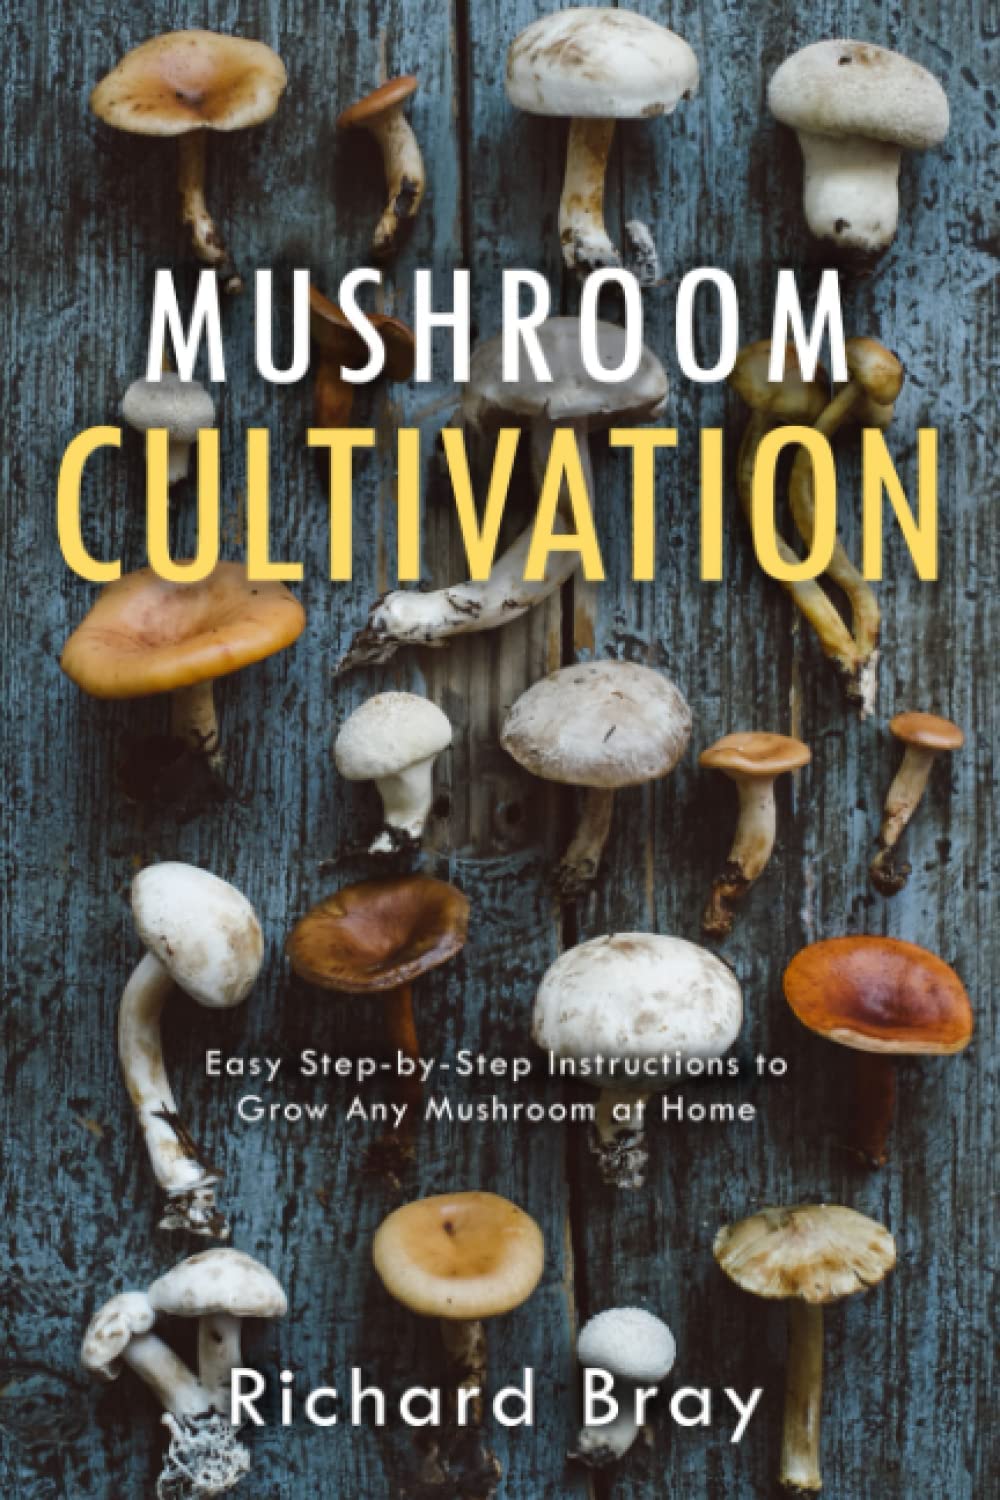 Mushroom Cultivation: 12 Ways to Become the MacGyver of Mushrooms (Urban Homesteading)